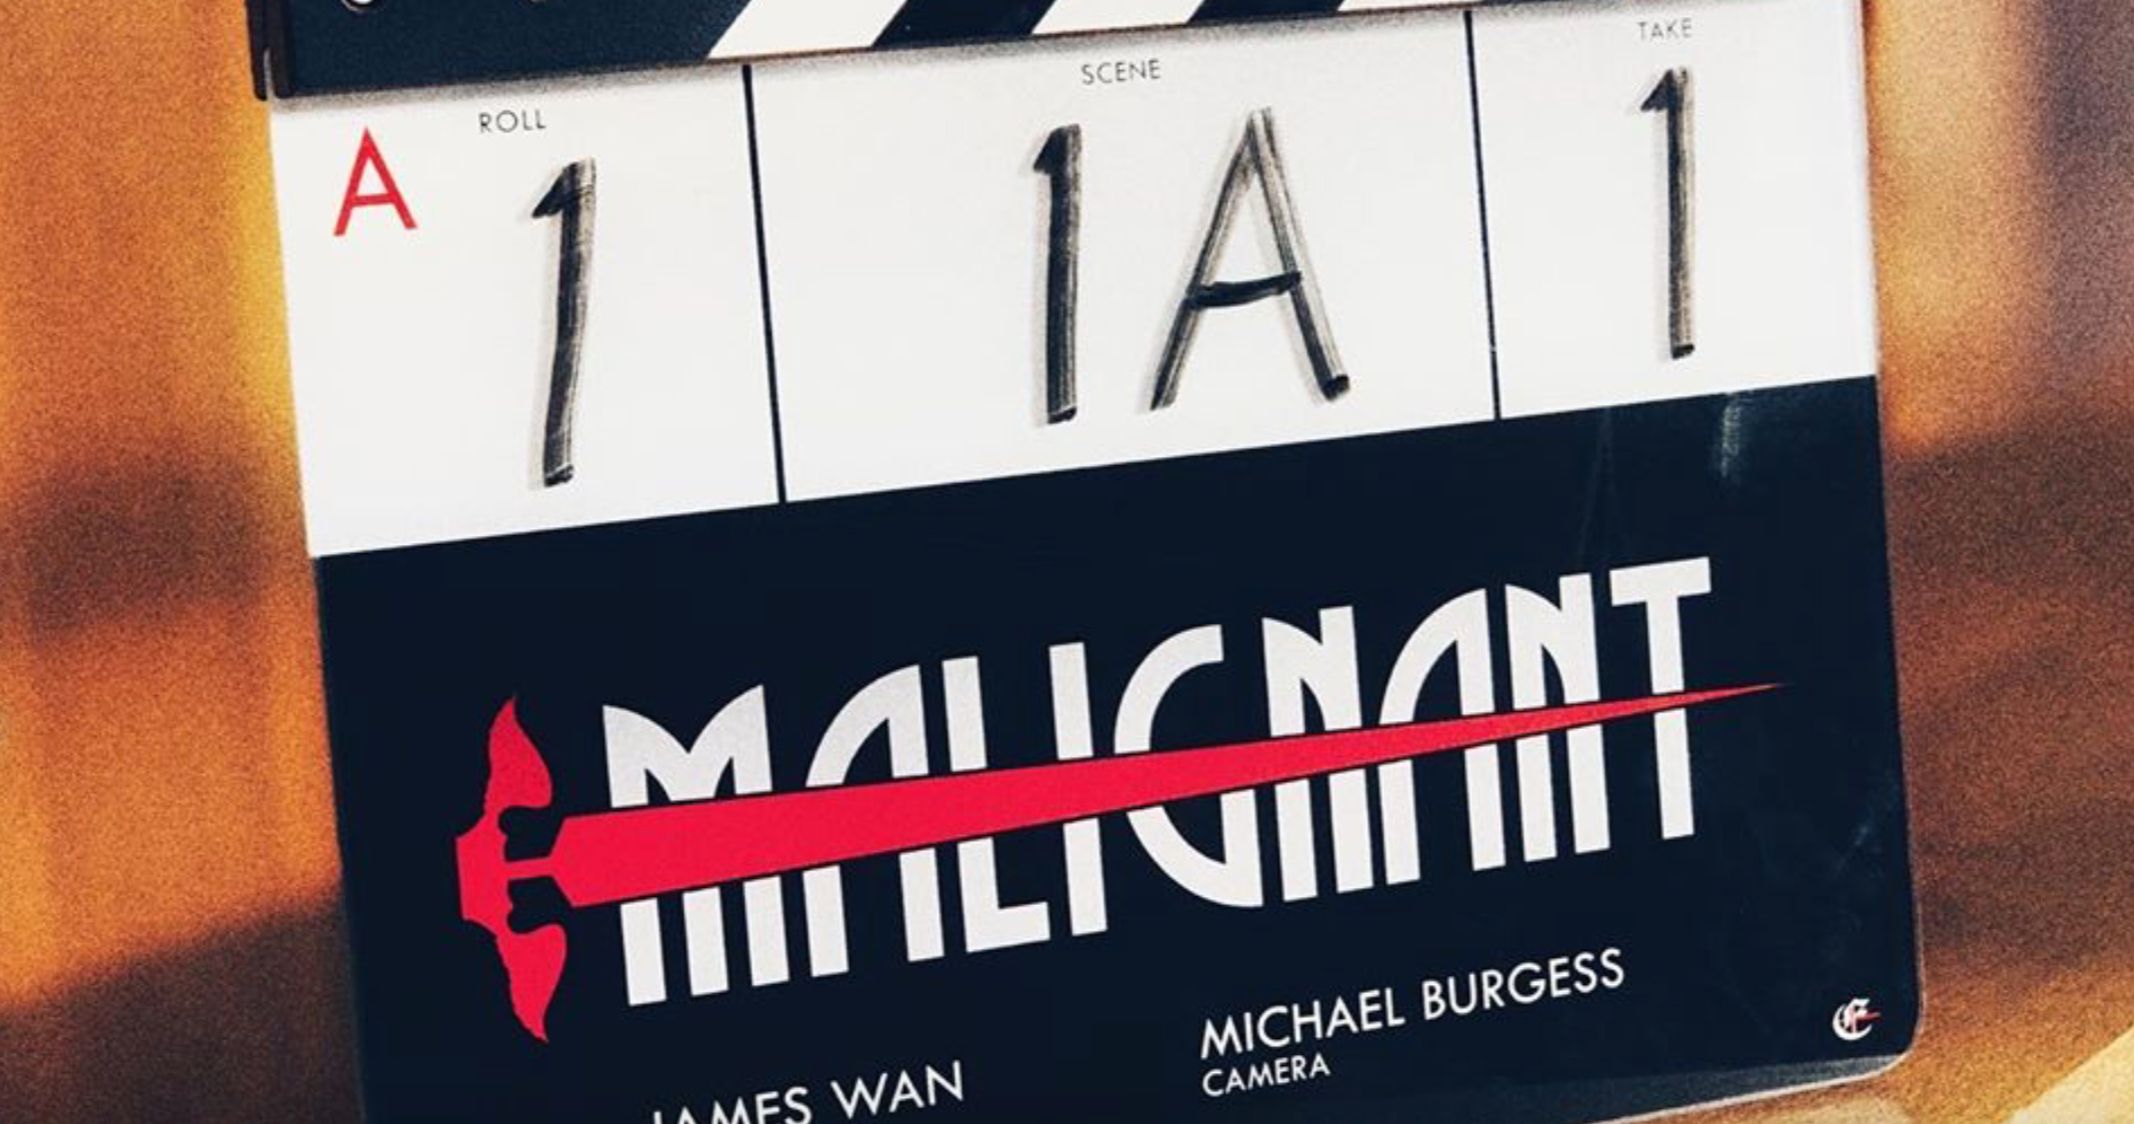 Malignant Begins Shooting: James Wan Shares First Photo from New Horror Movie